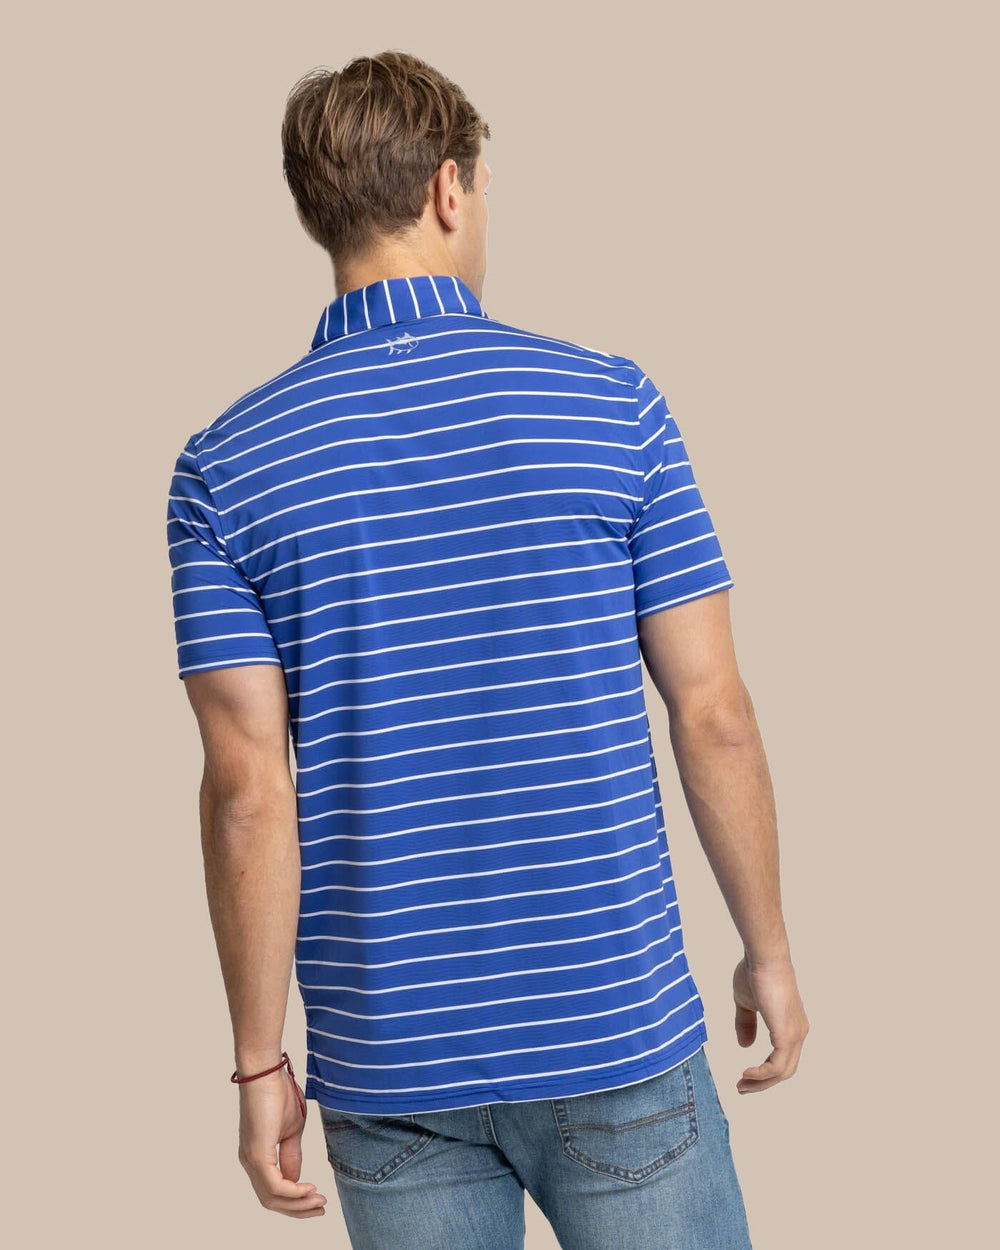 The back view of the Southern Tide brrr-eeze Desmond Stripe Performance Polo by Southern Tide - University Blue